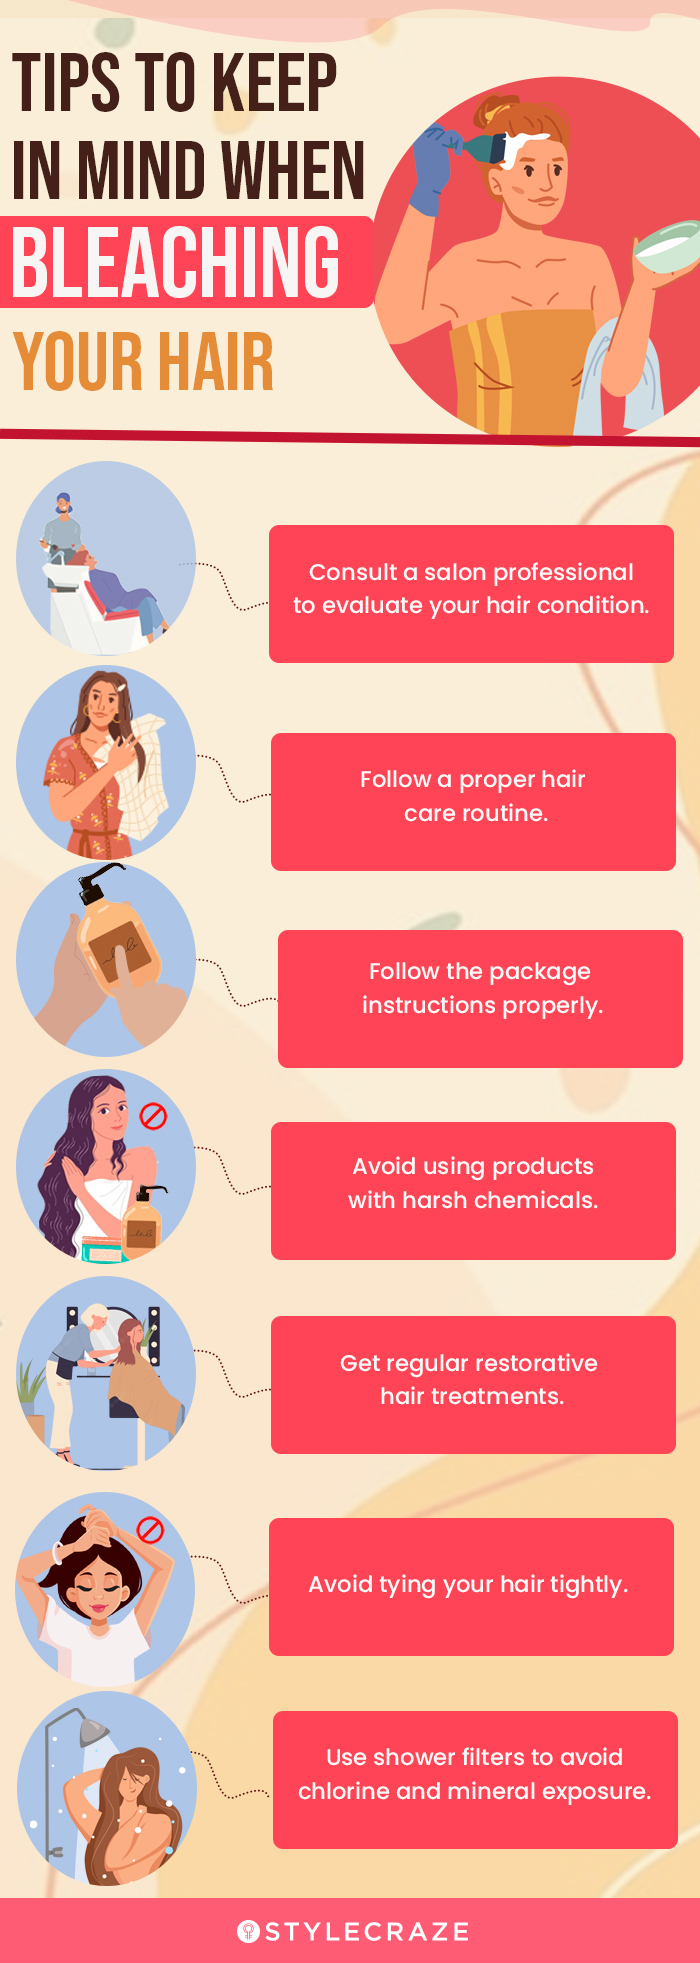 tips to keep in mind when bleaching your hair [infographic]